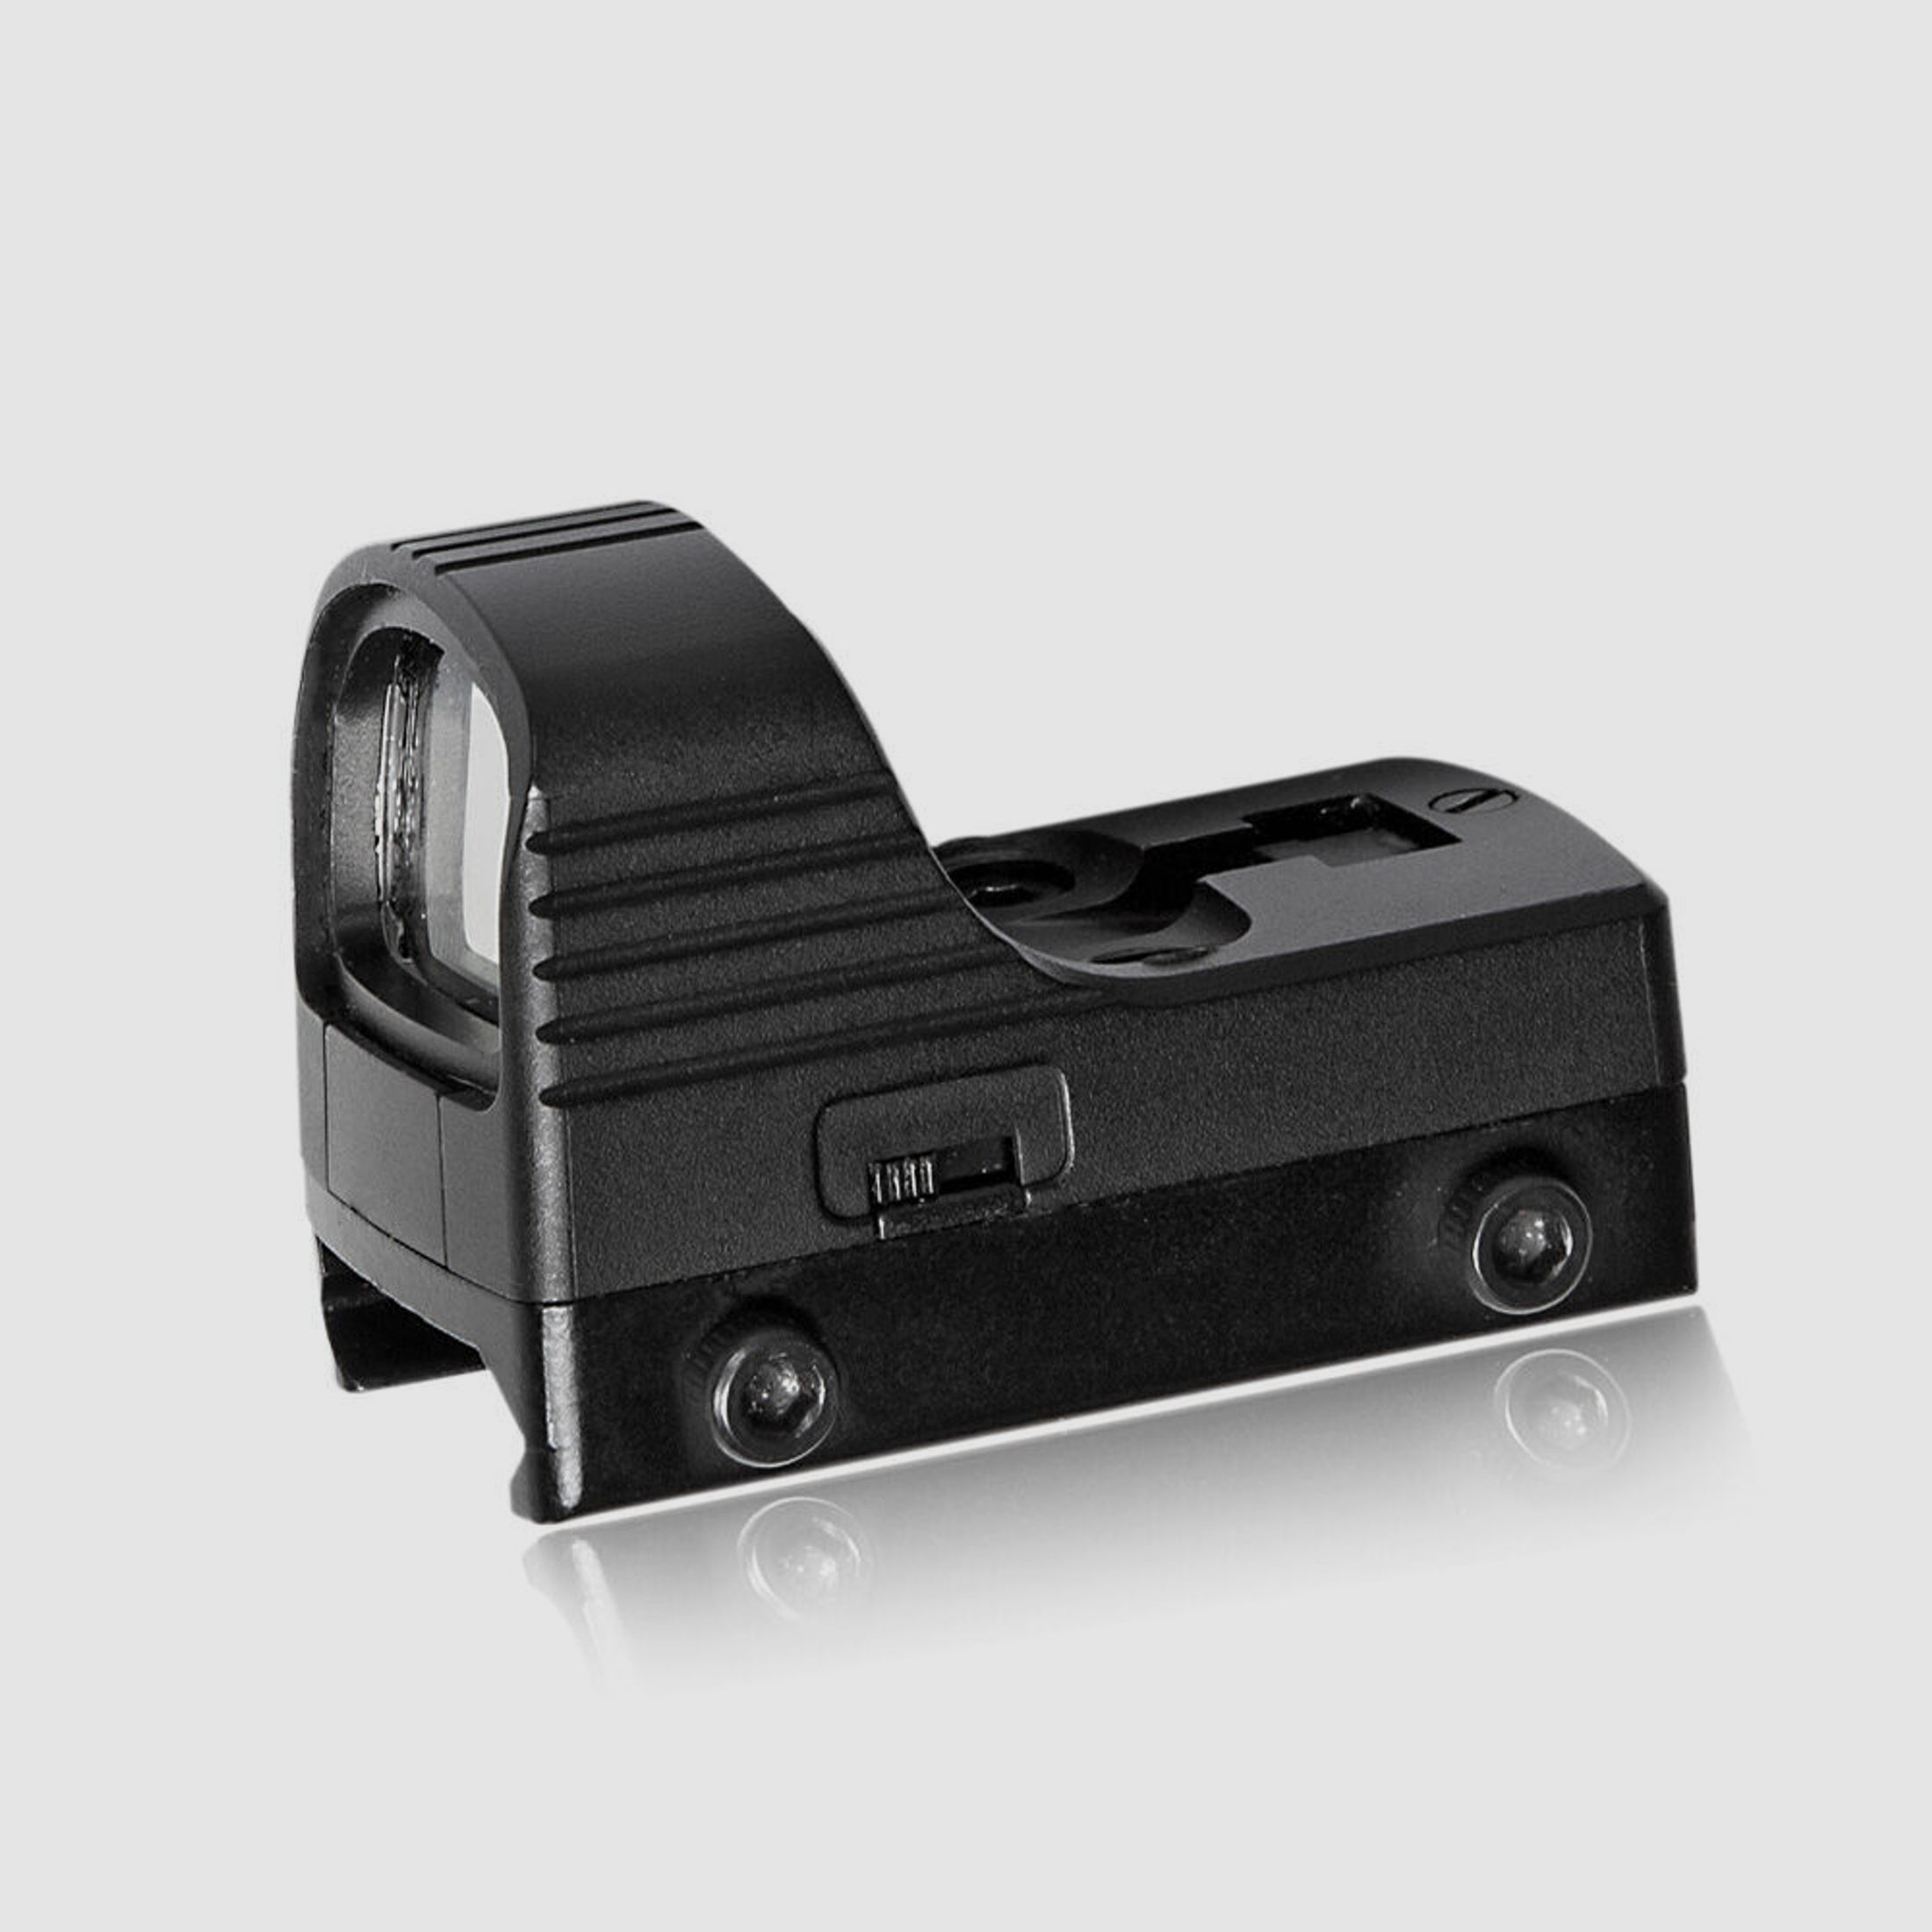 ASG Micro Red Dot Sight Rotpunktvisier mit Montage